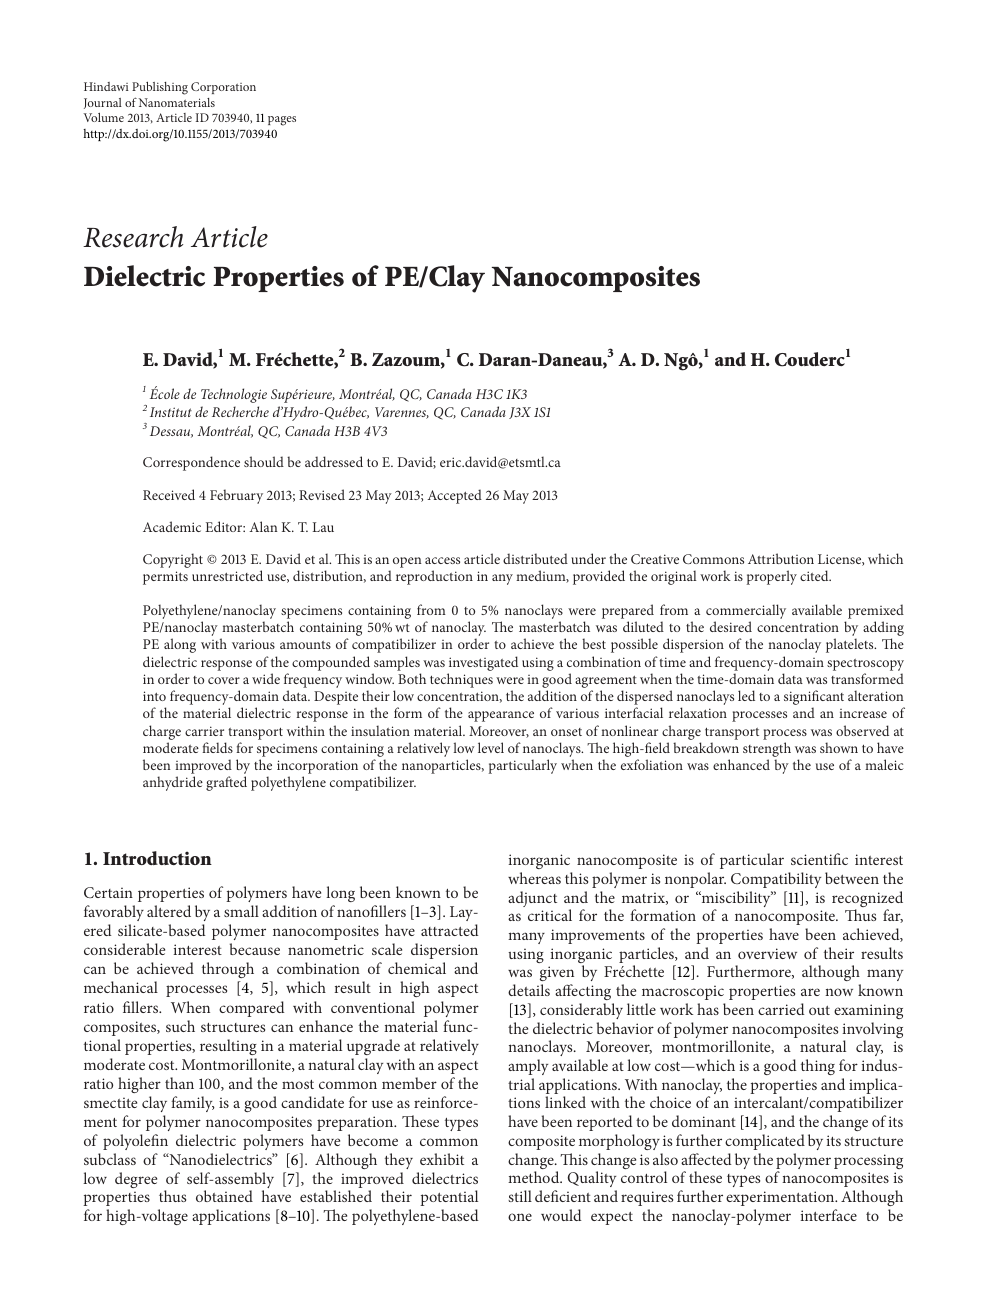 Dielectric Properties Of Pe Clay Nanocomposites Topic Of Research Paper In Nano Technology Download Scholarly Article Pdf And Read For Free On Cyberleninka Open Science Hub